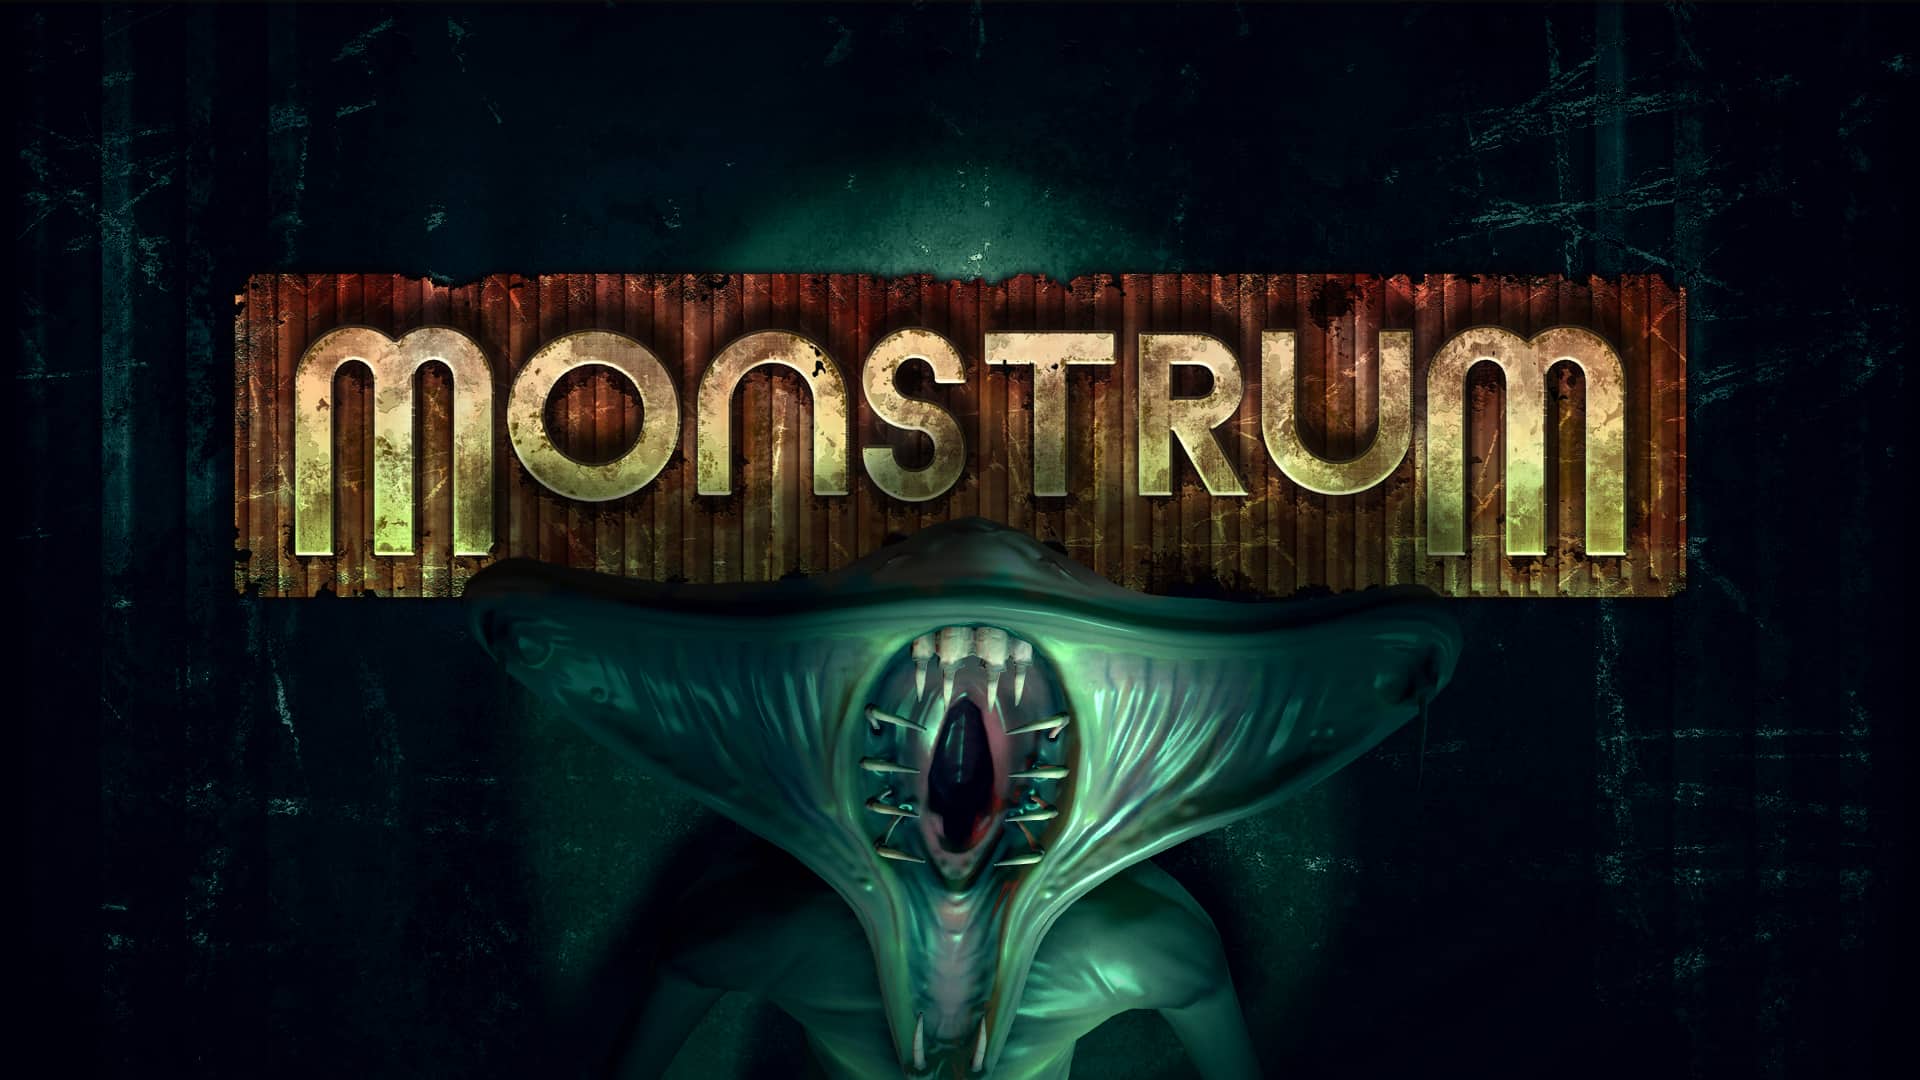 Survival Horror Game Monstrum Hits The Stores On September 25 For Nintendo Switch, PlayStation 4 & Xbox One